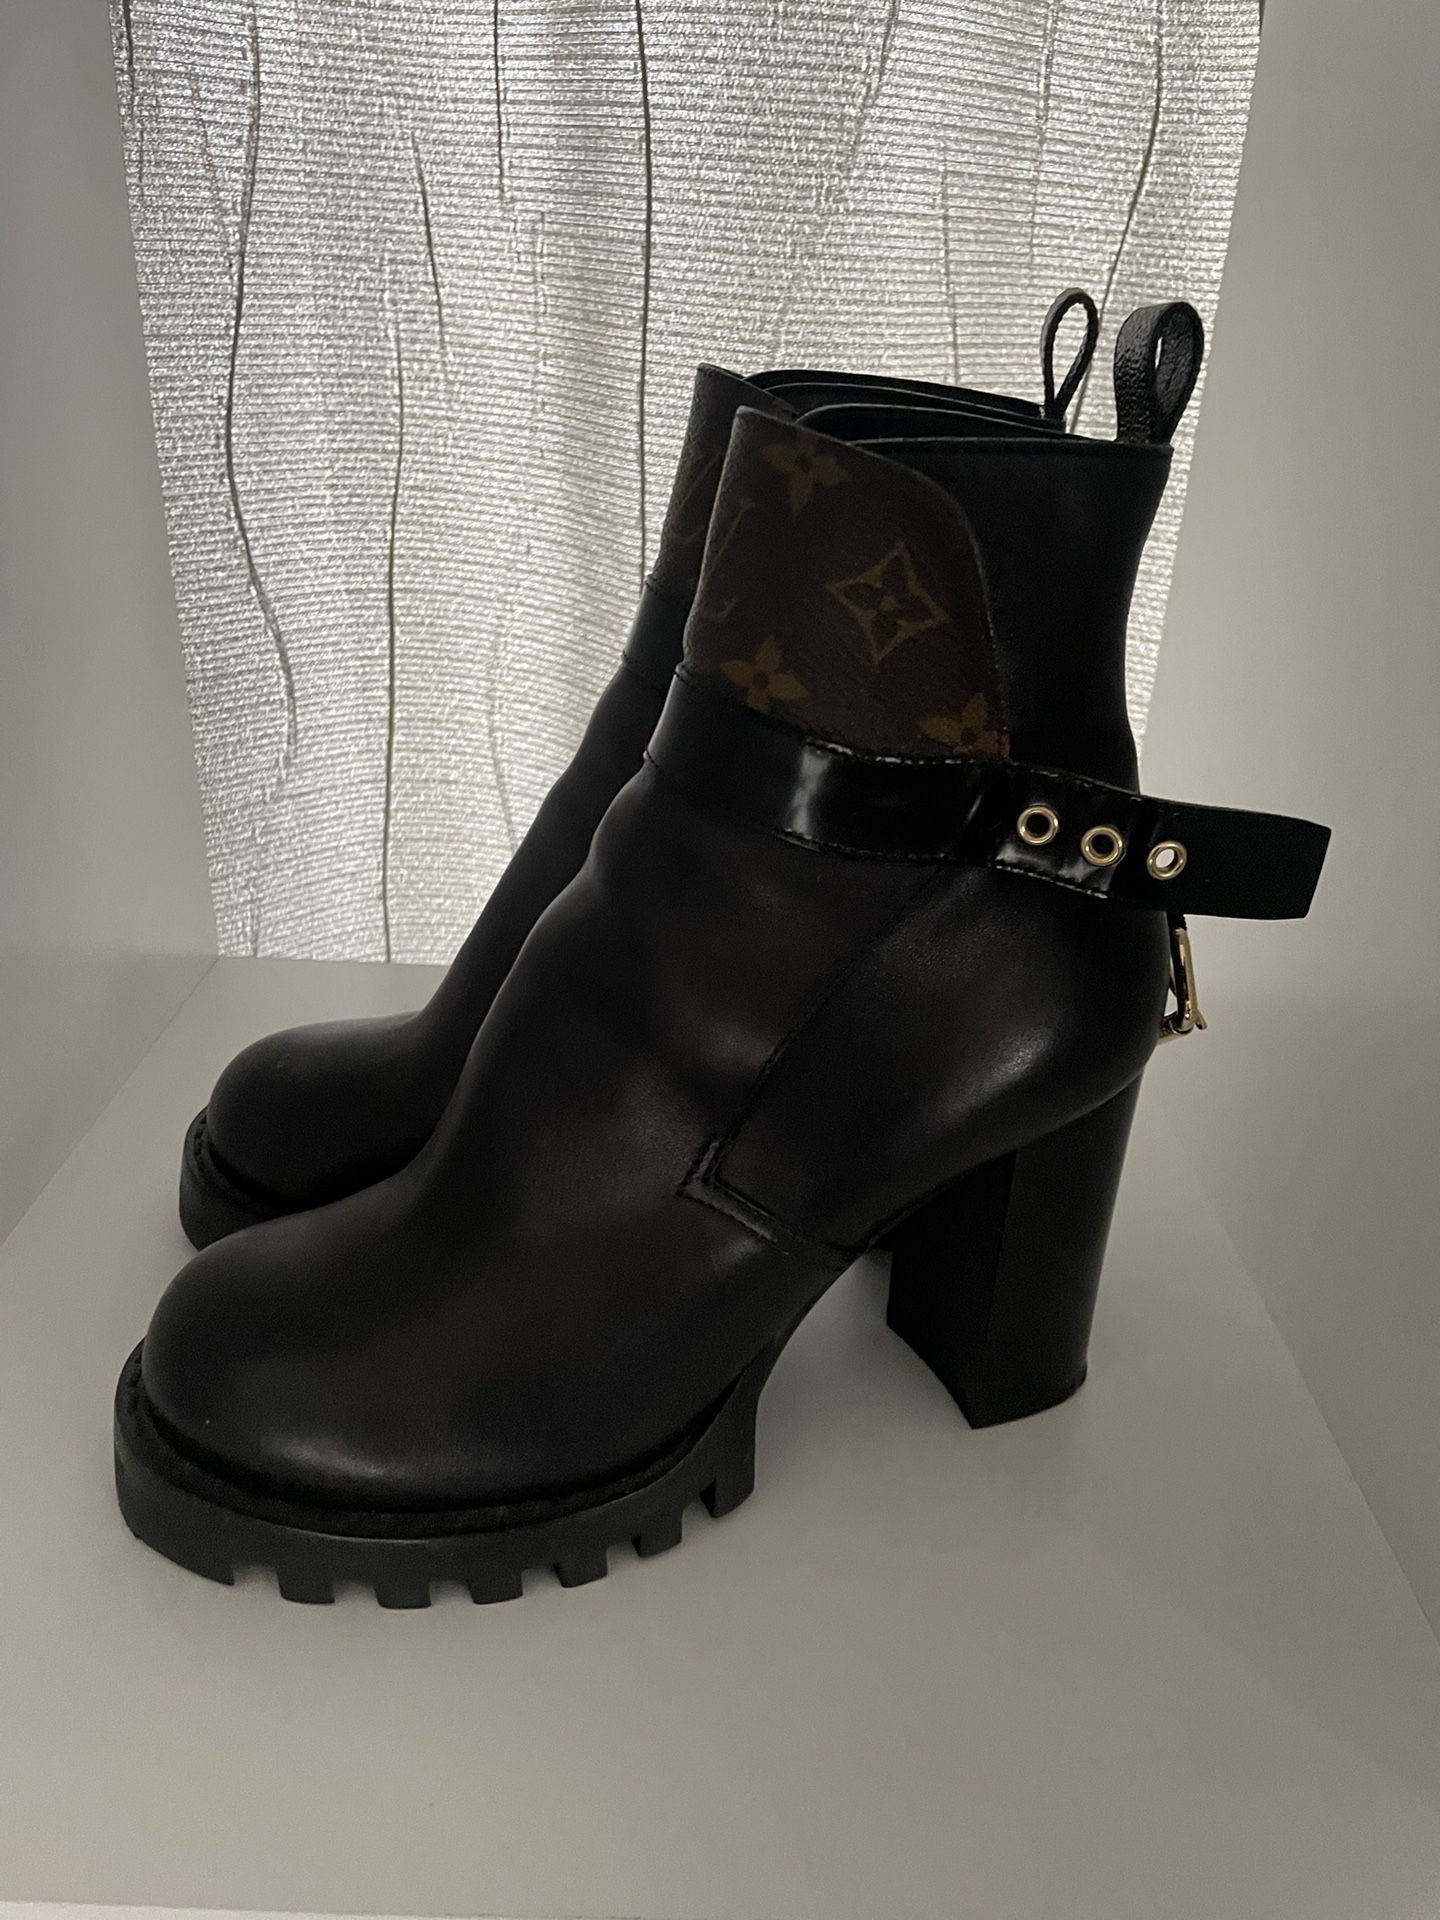 Louis Vuitton Boots for Sale in Tustin, CA - OfferUp